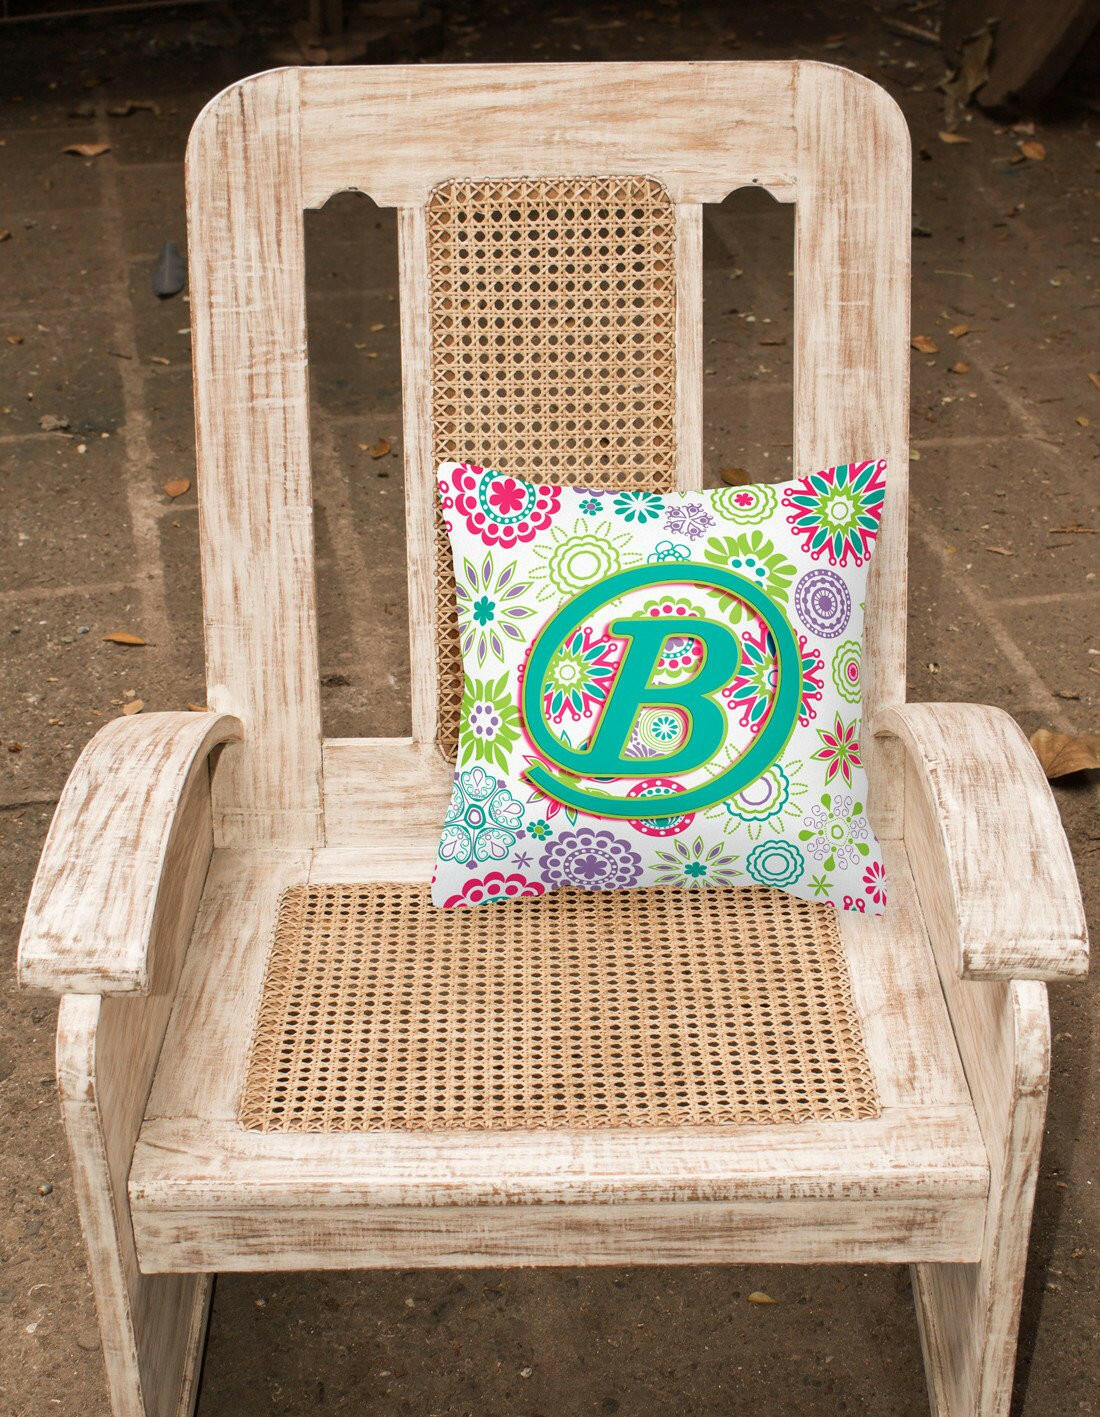 Letter B Flowers Pink Teal Green Initial Canvas Fabric Decorative Pillow CJ2011-BPW1414 by Caroline's Treasures